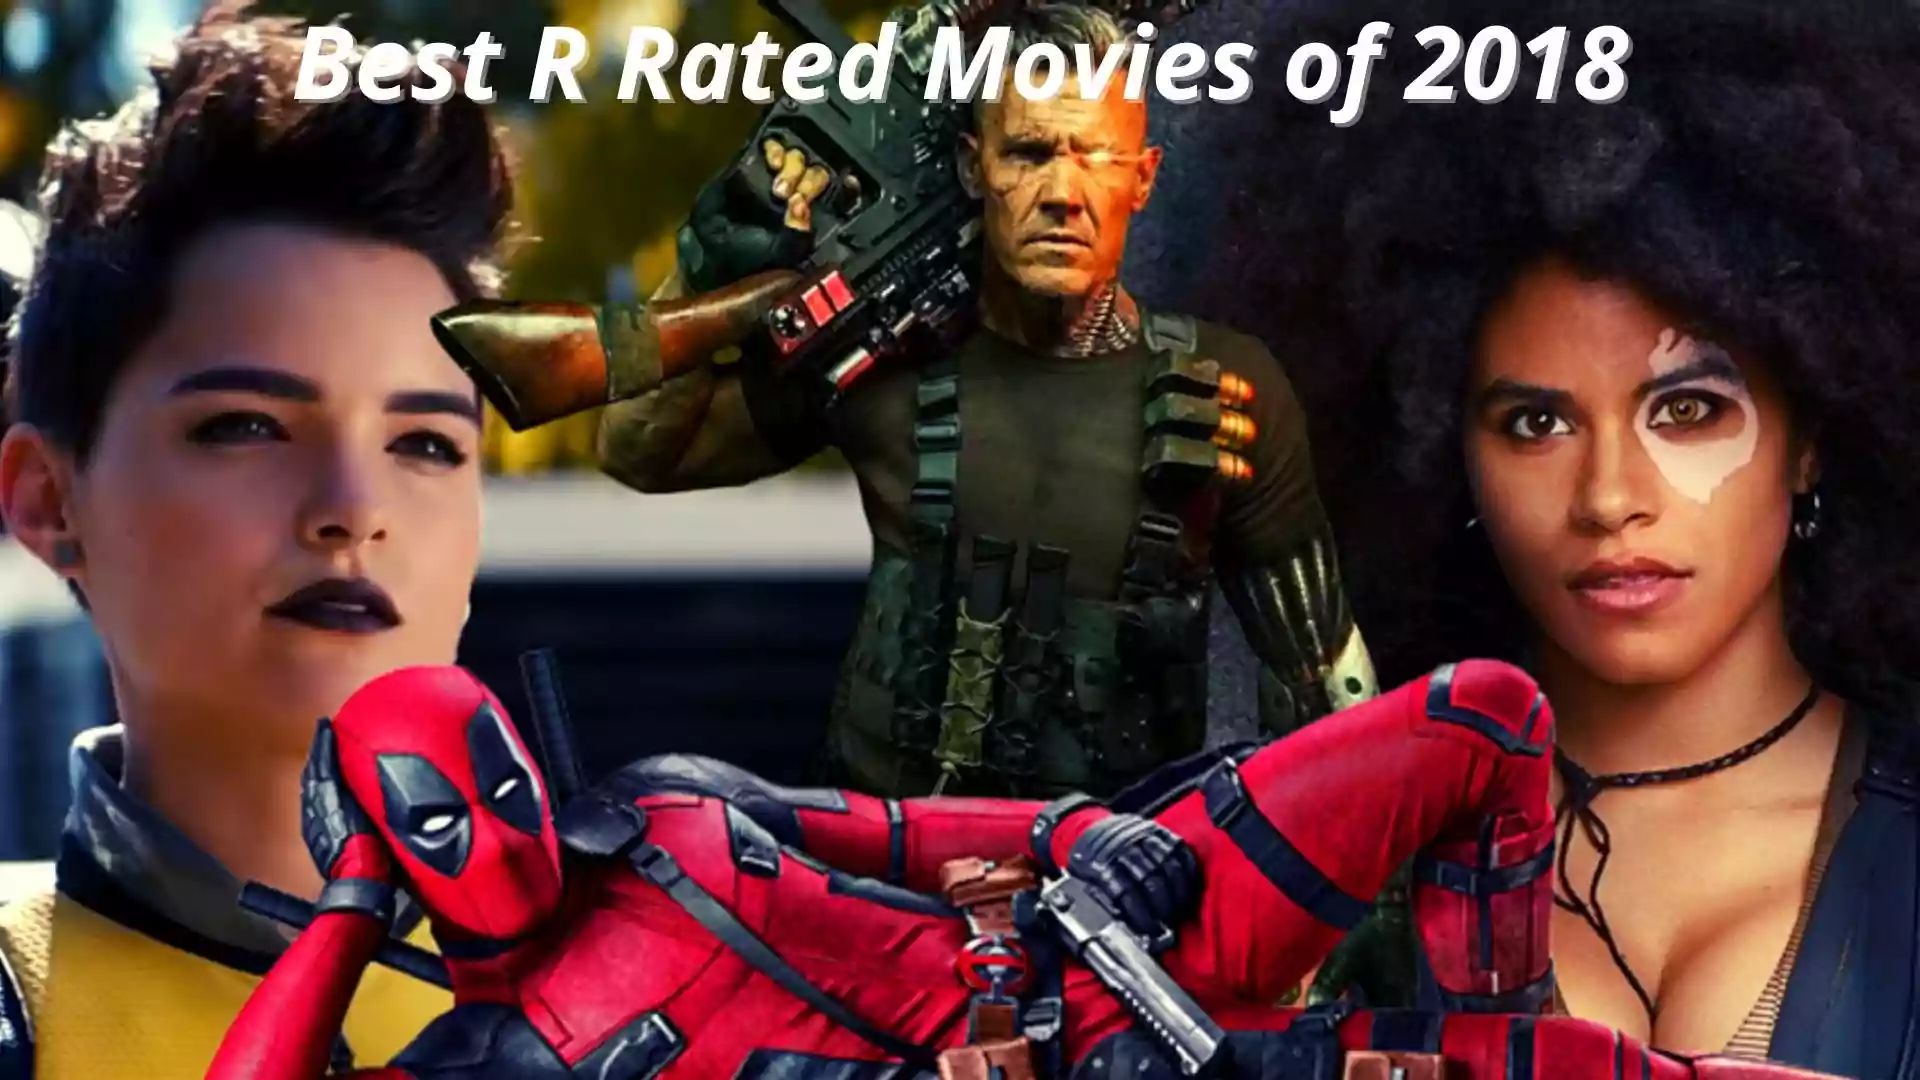 Best R Rated Movies of 2018